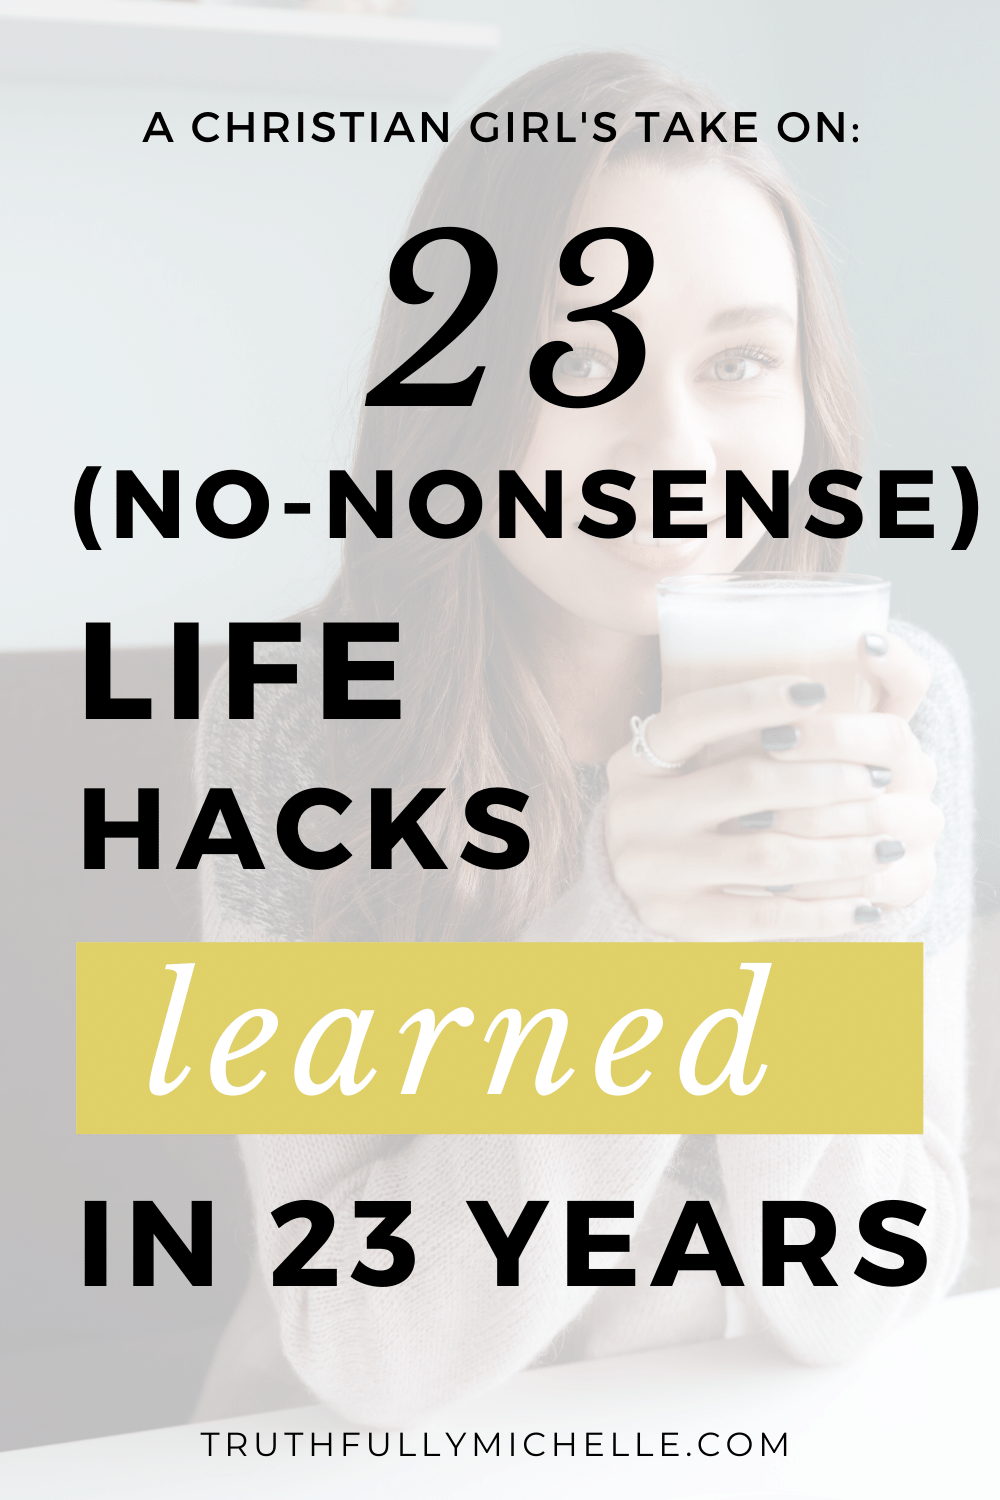 23 lessons in 23 years, 23 life lessons, Christian life lessons, Christian life lessons for young adults, Christian life hacks